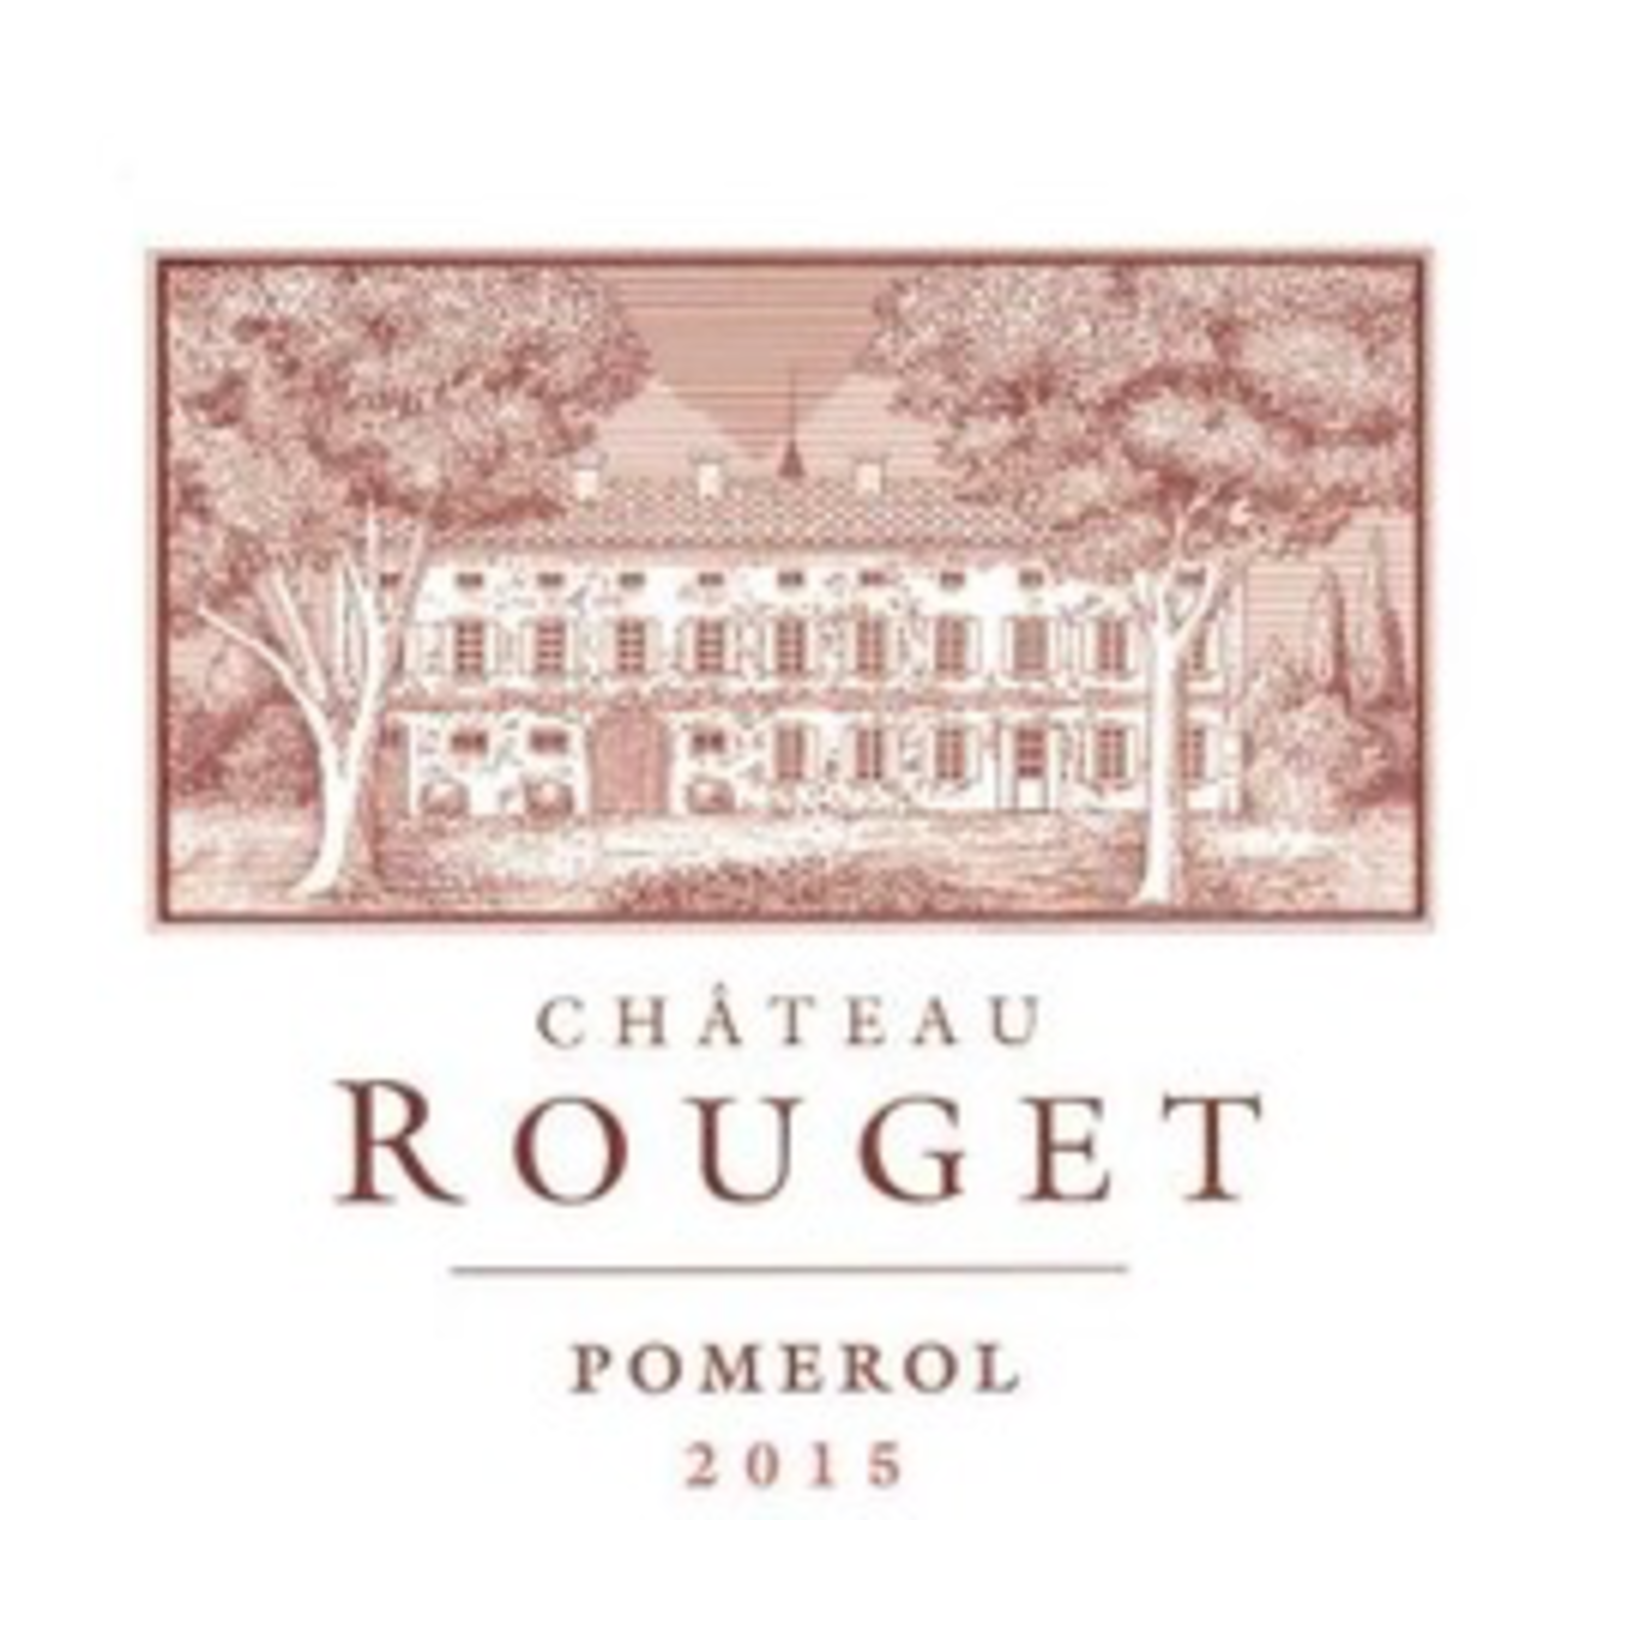 Wine Chateau Rouget 2015